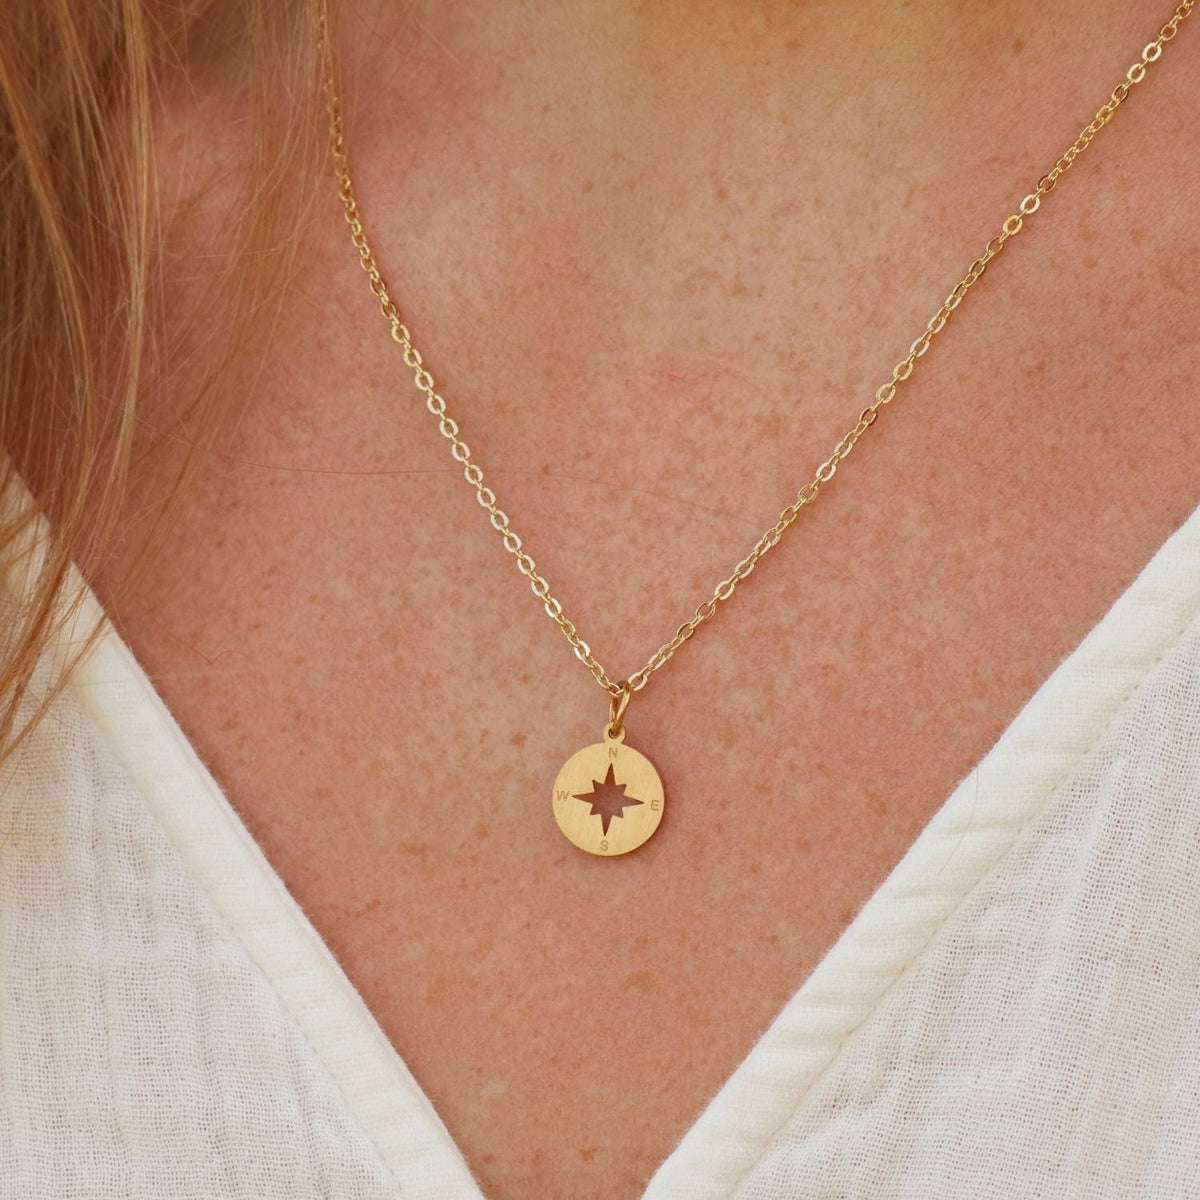 True Friendship | Grateful God Brought You Into My Life | Compass Necklace